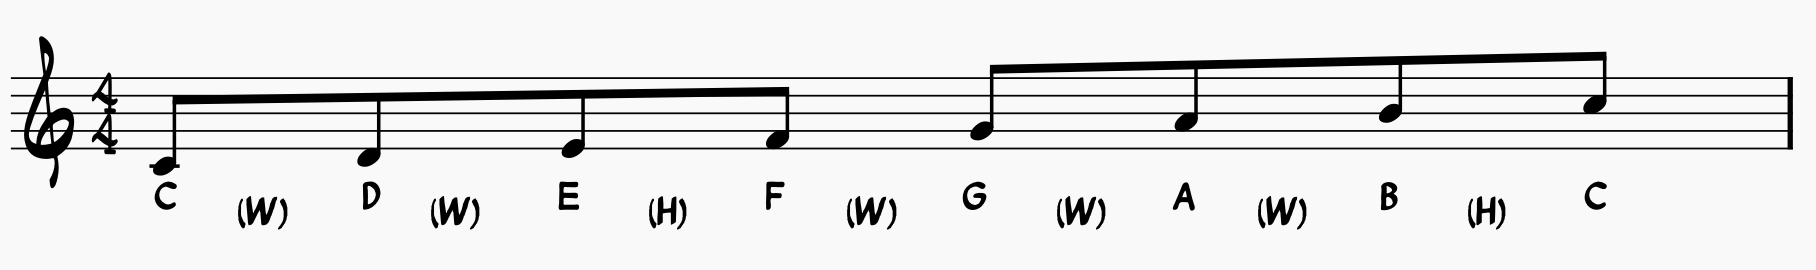 C Major Scale notated with whole steps and half steps